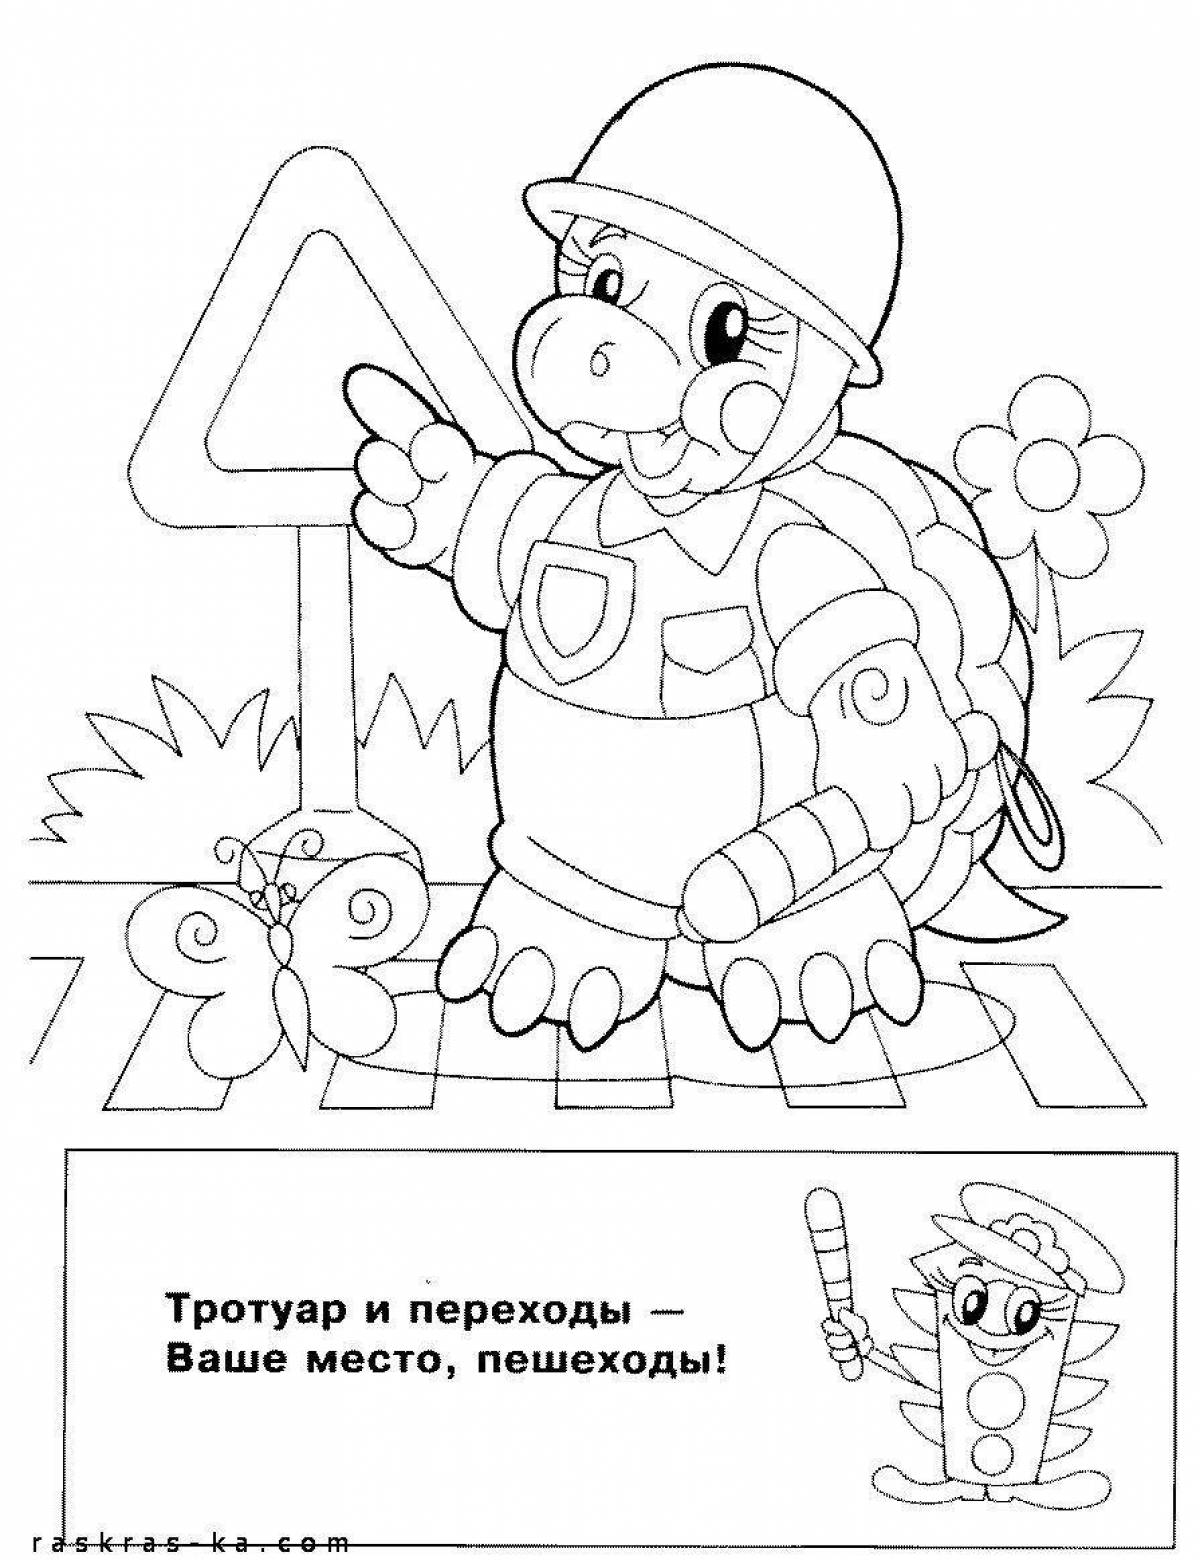 Coloring book for children pdd